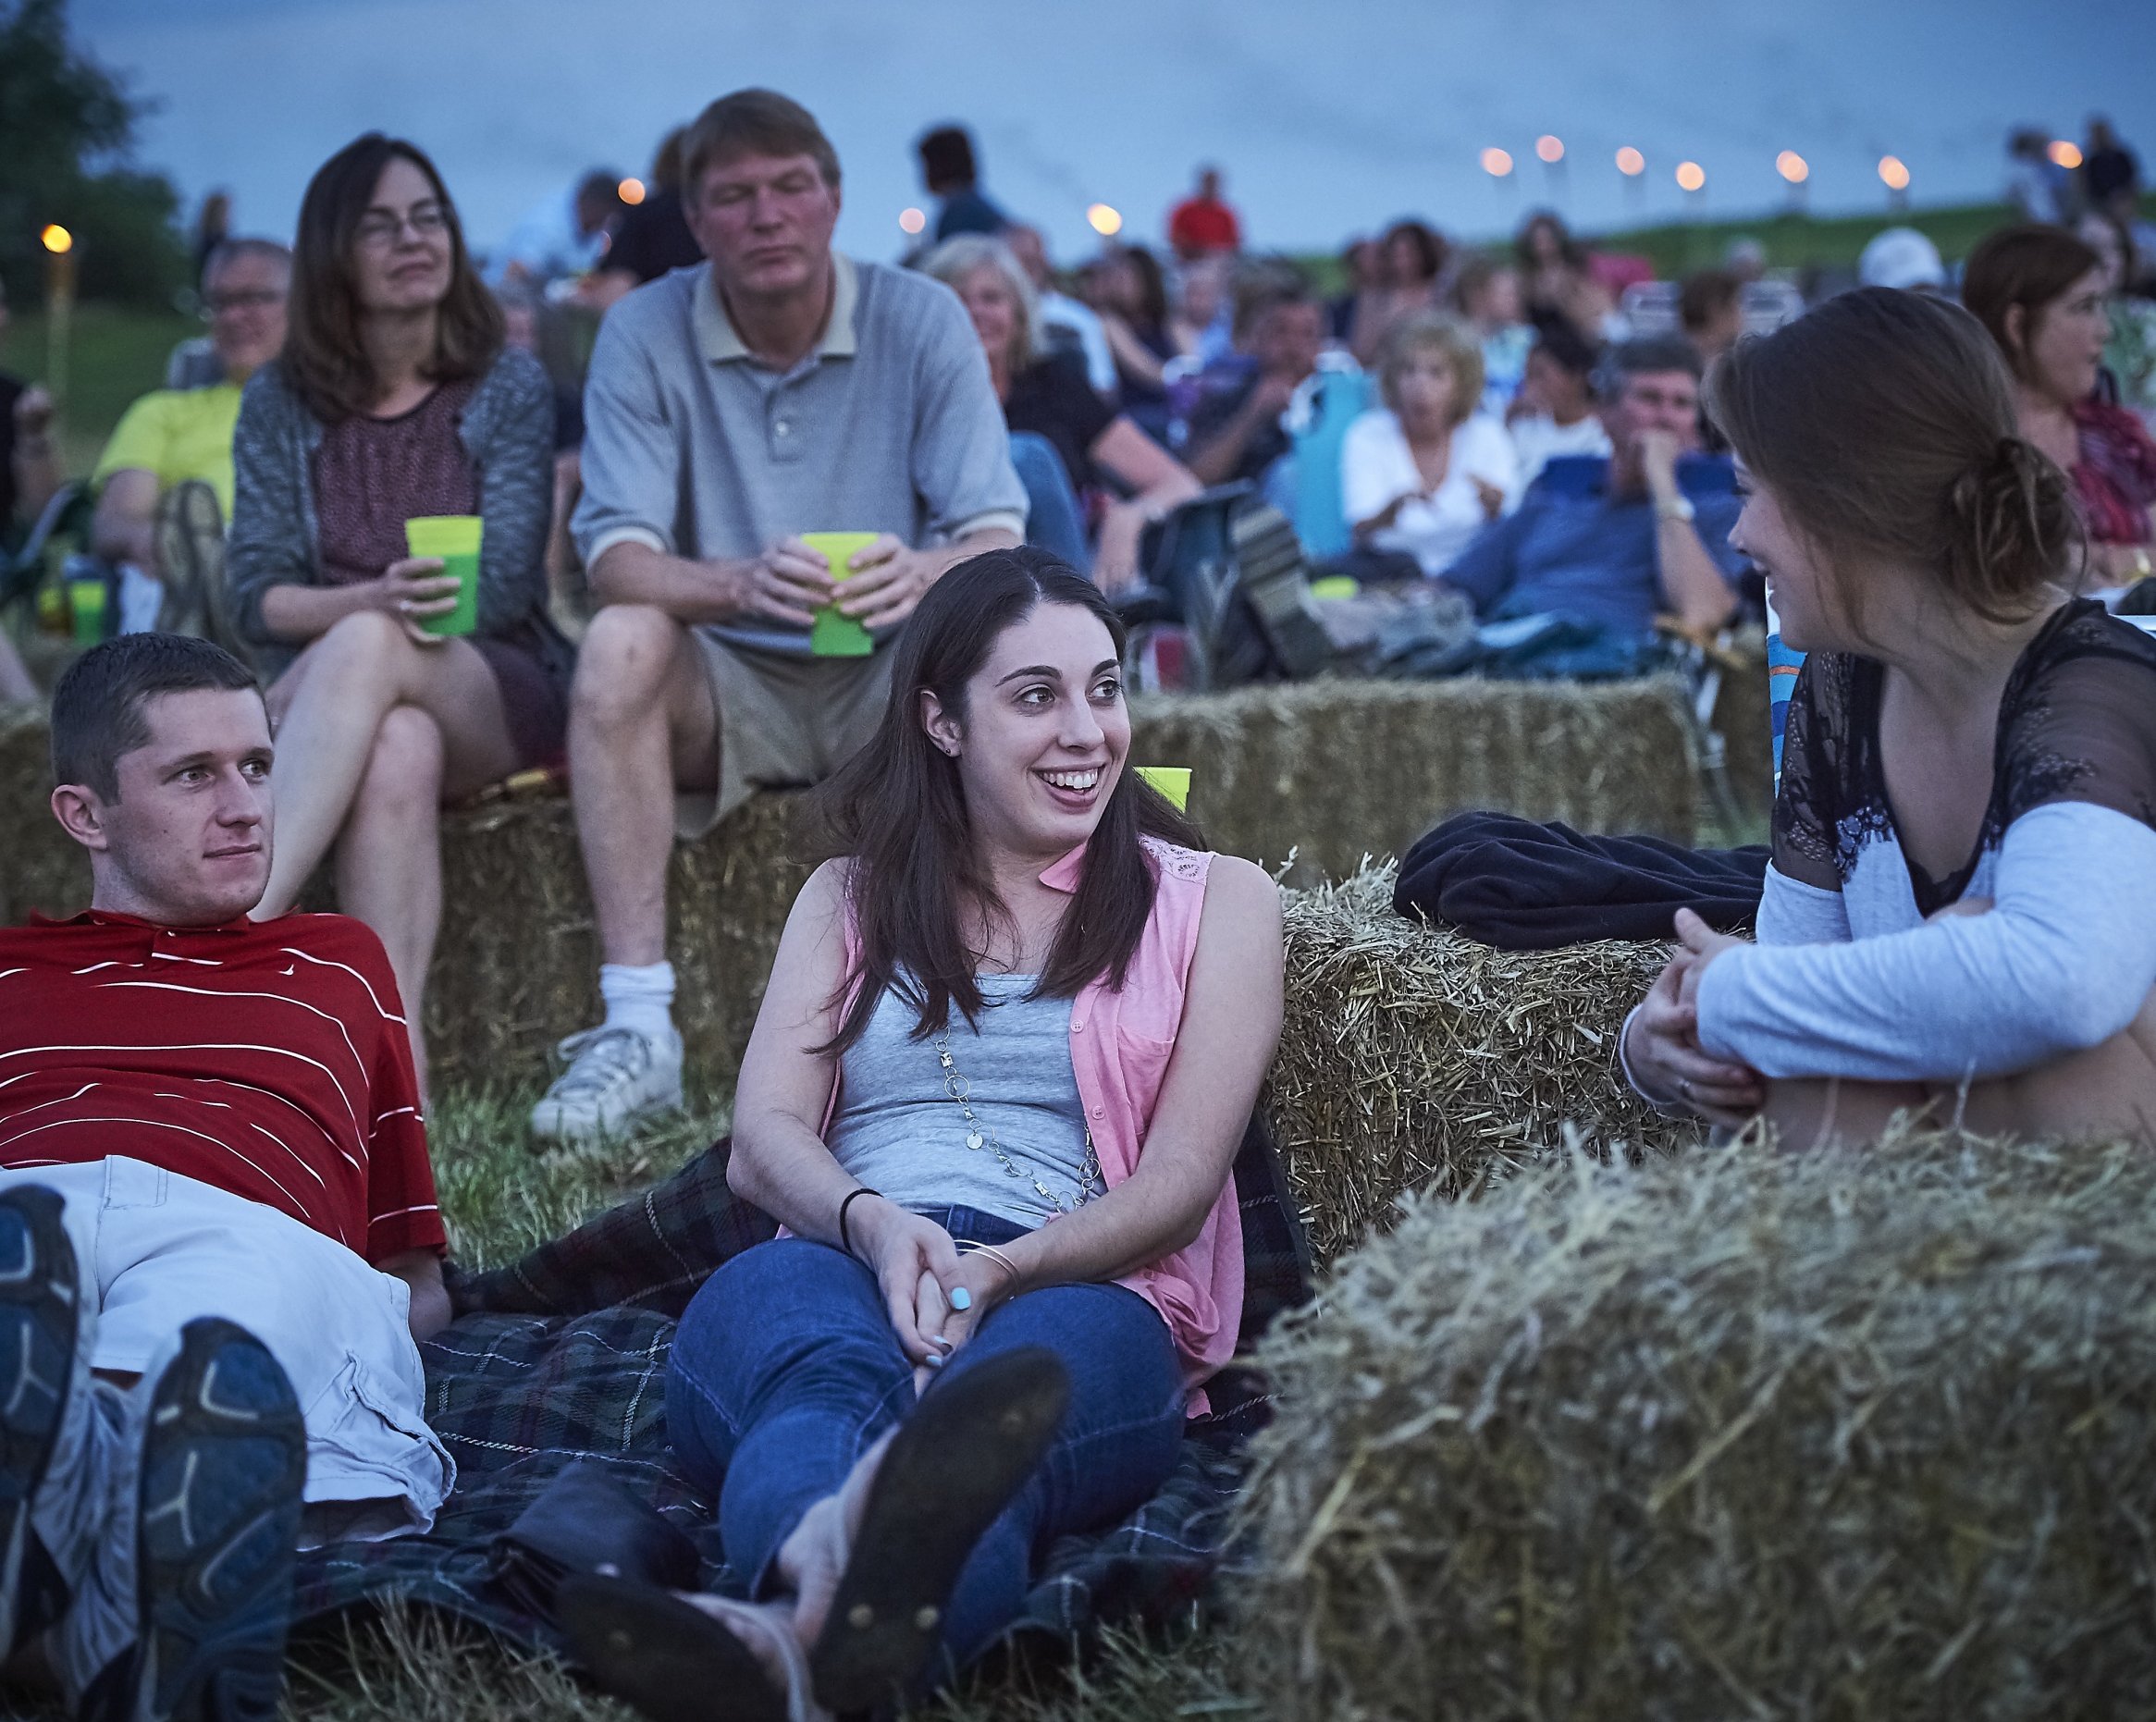 A crowd of people sitting on haybales outdoors in the evening smile and talk.